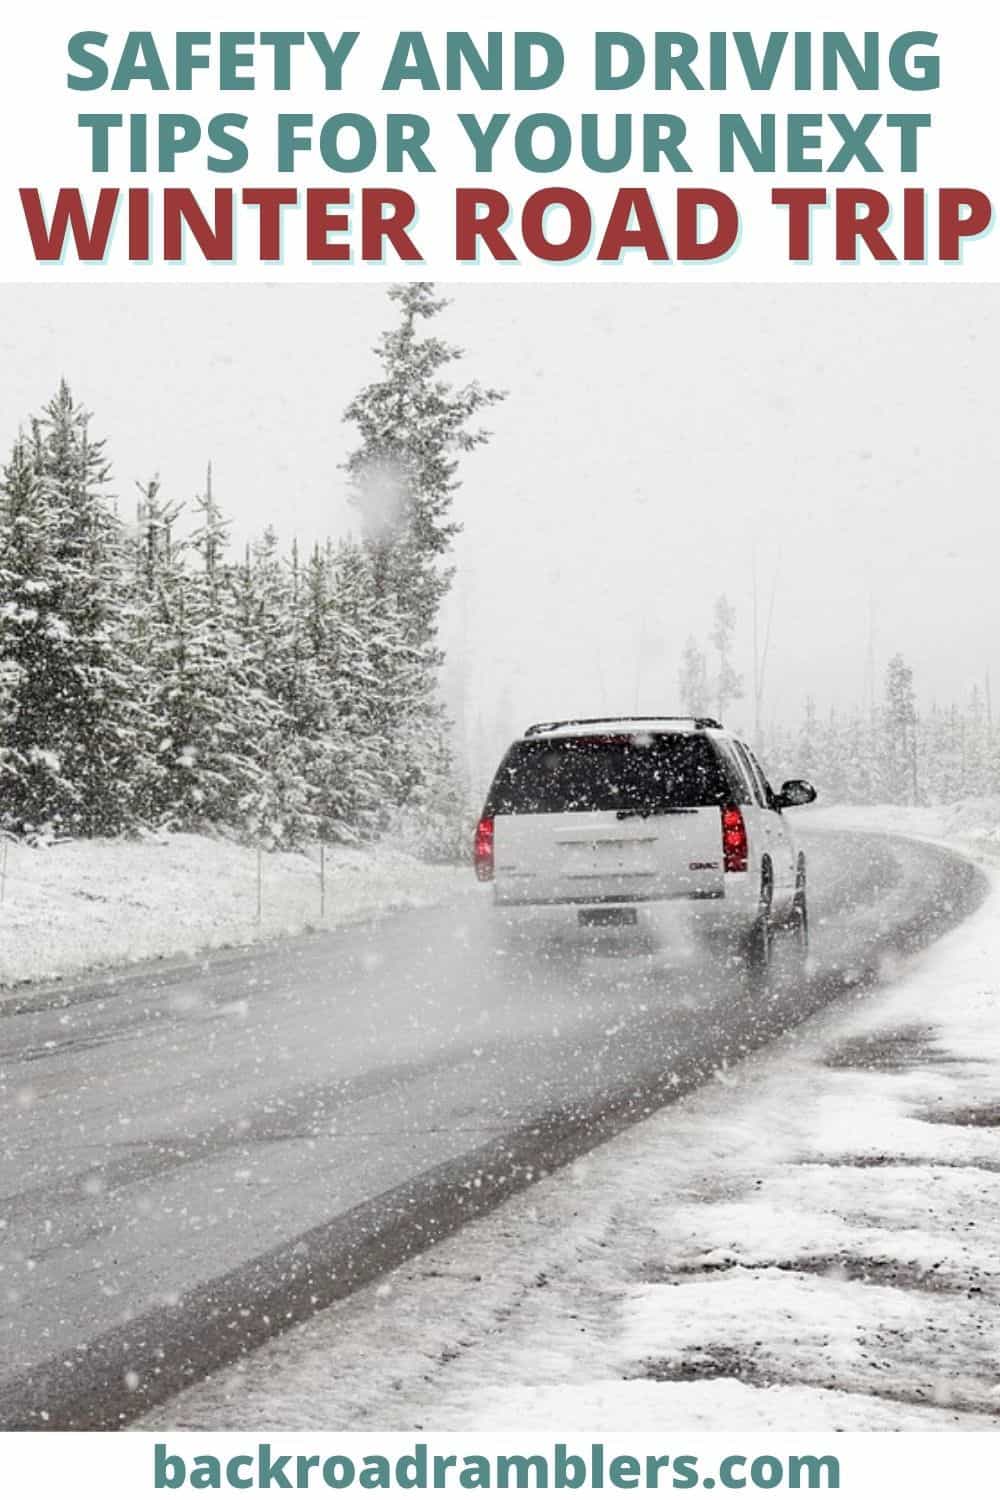 A car driving on a snowy road. Text overlay: Safety and Driving Tips for Your Next Winter Road Trip tips.